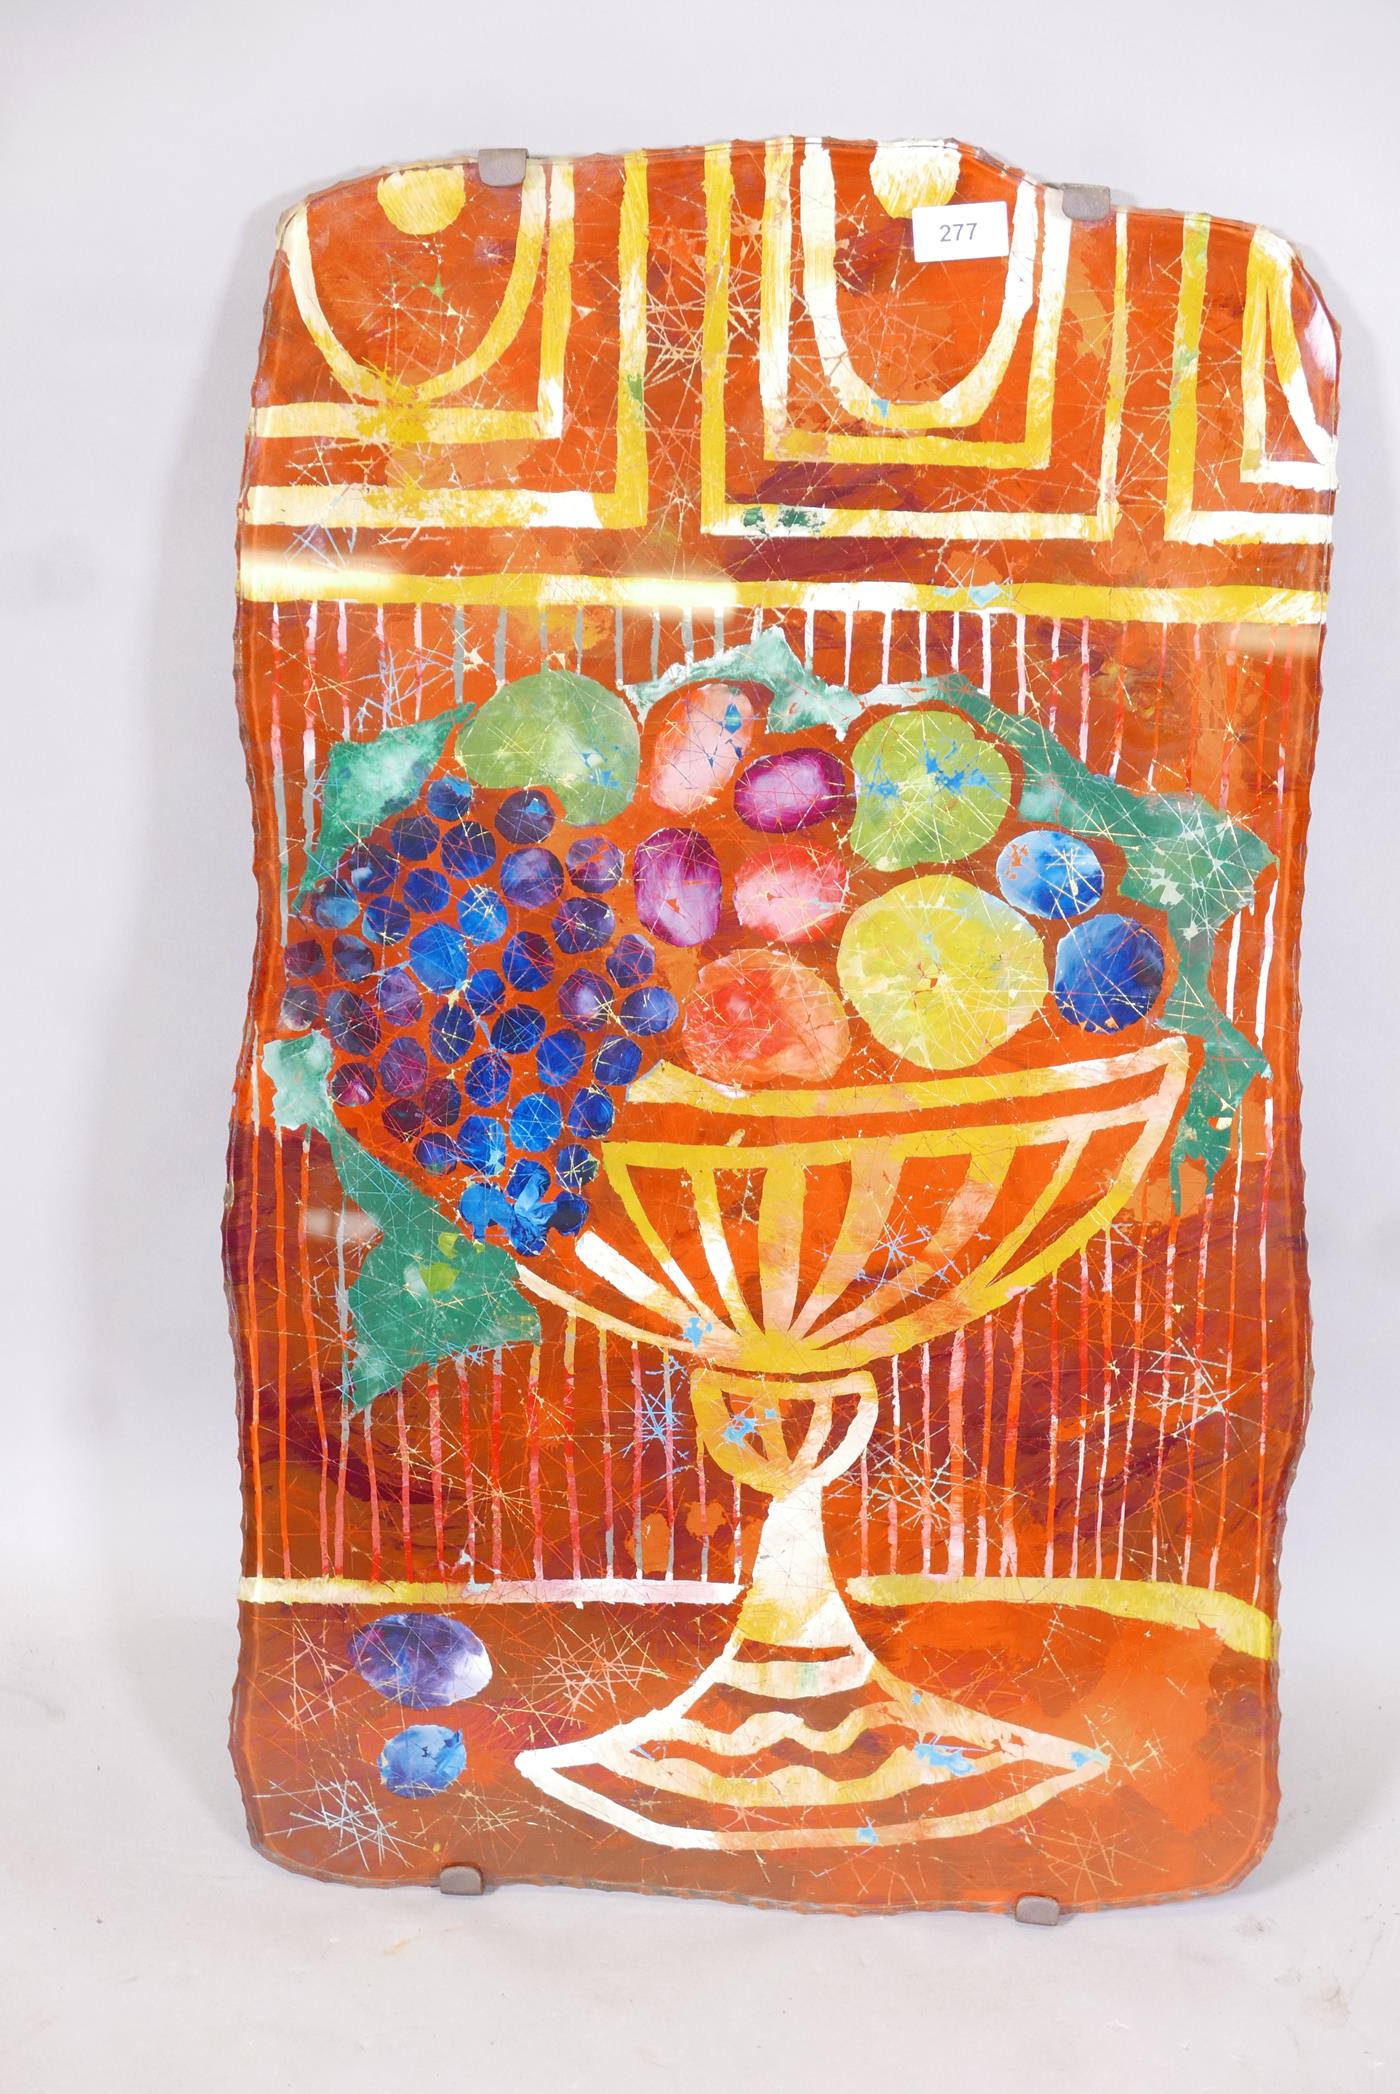 Erwin Burger, a mid century studio glass, reverse painted panel, signed and dated verso 1967, with